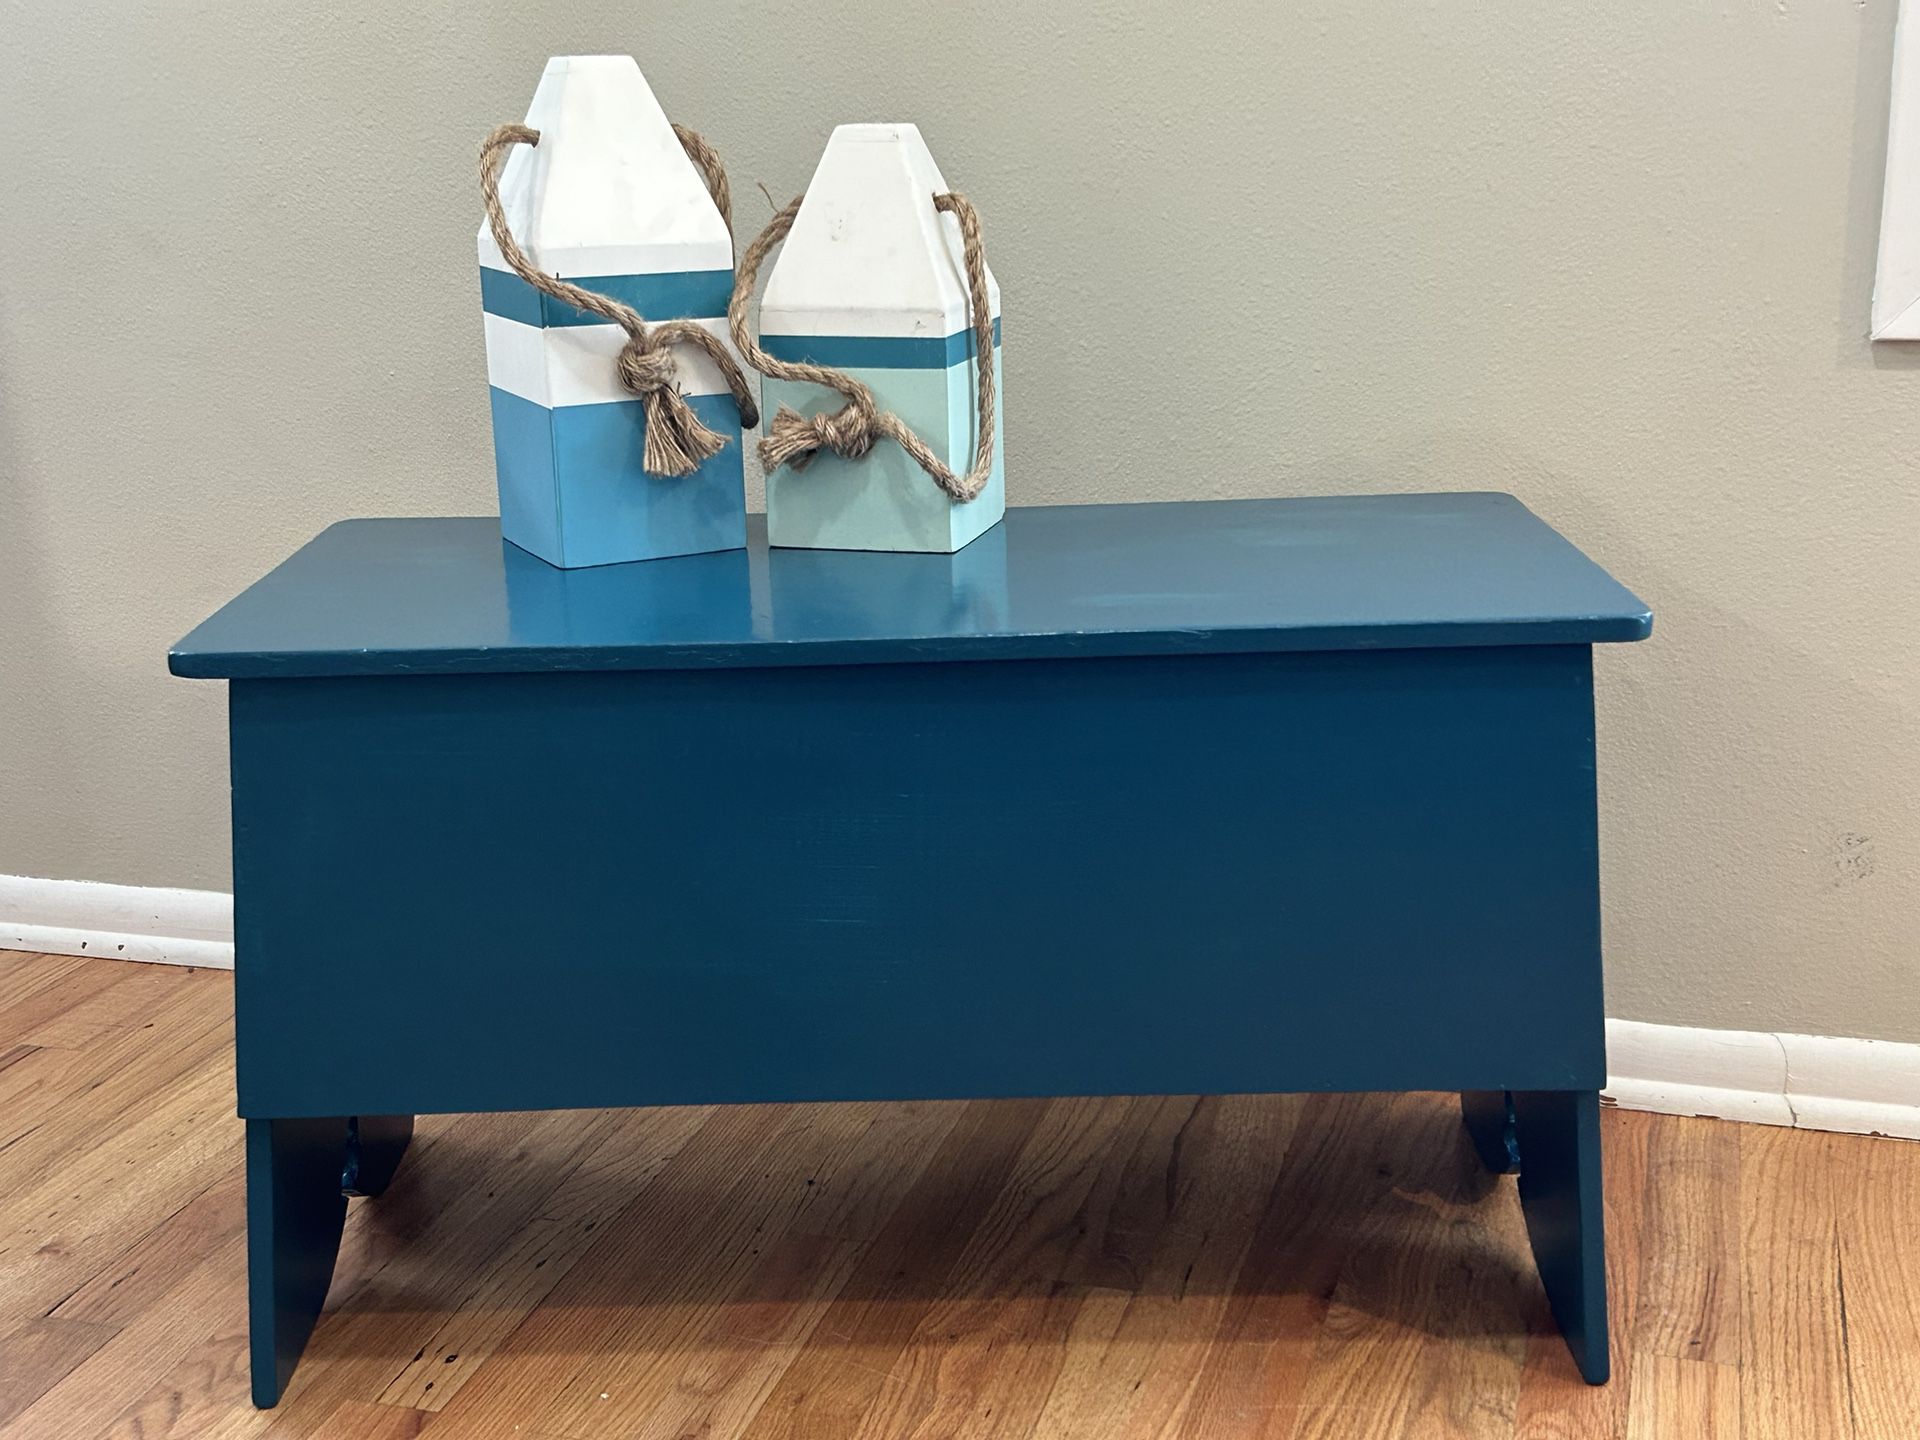 Adorable Yet Practical Small Decorative Wooden Bench In Dark Teal